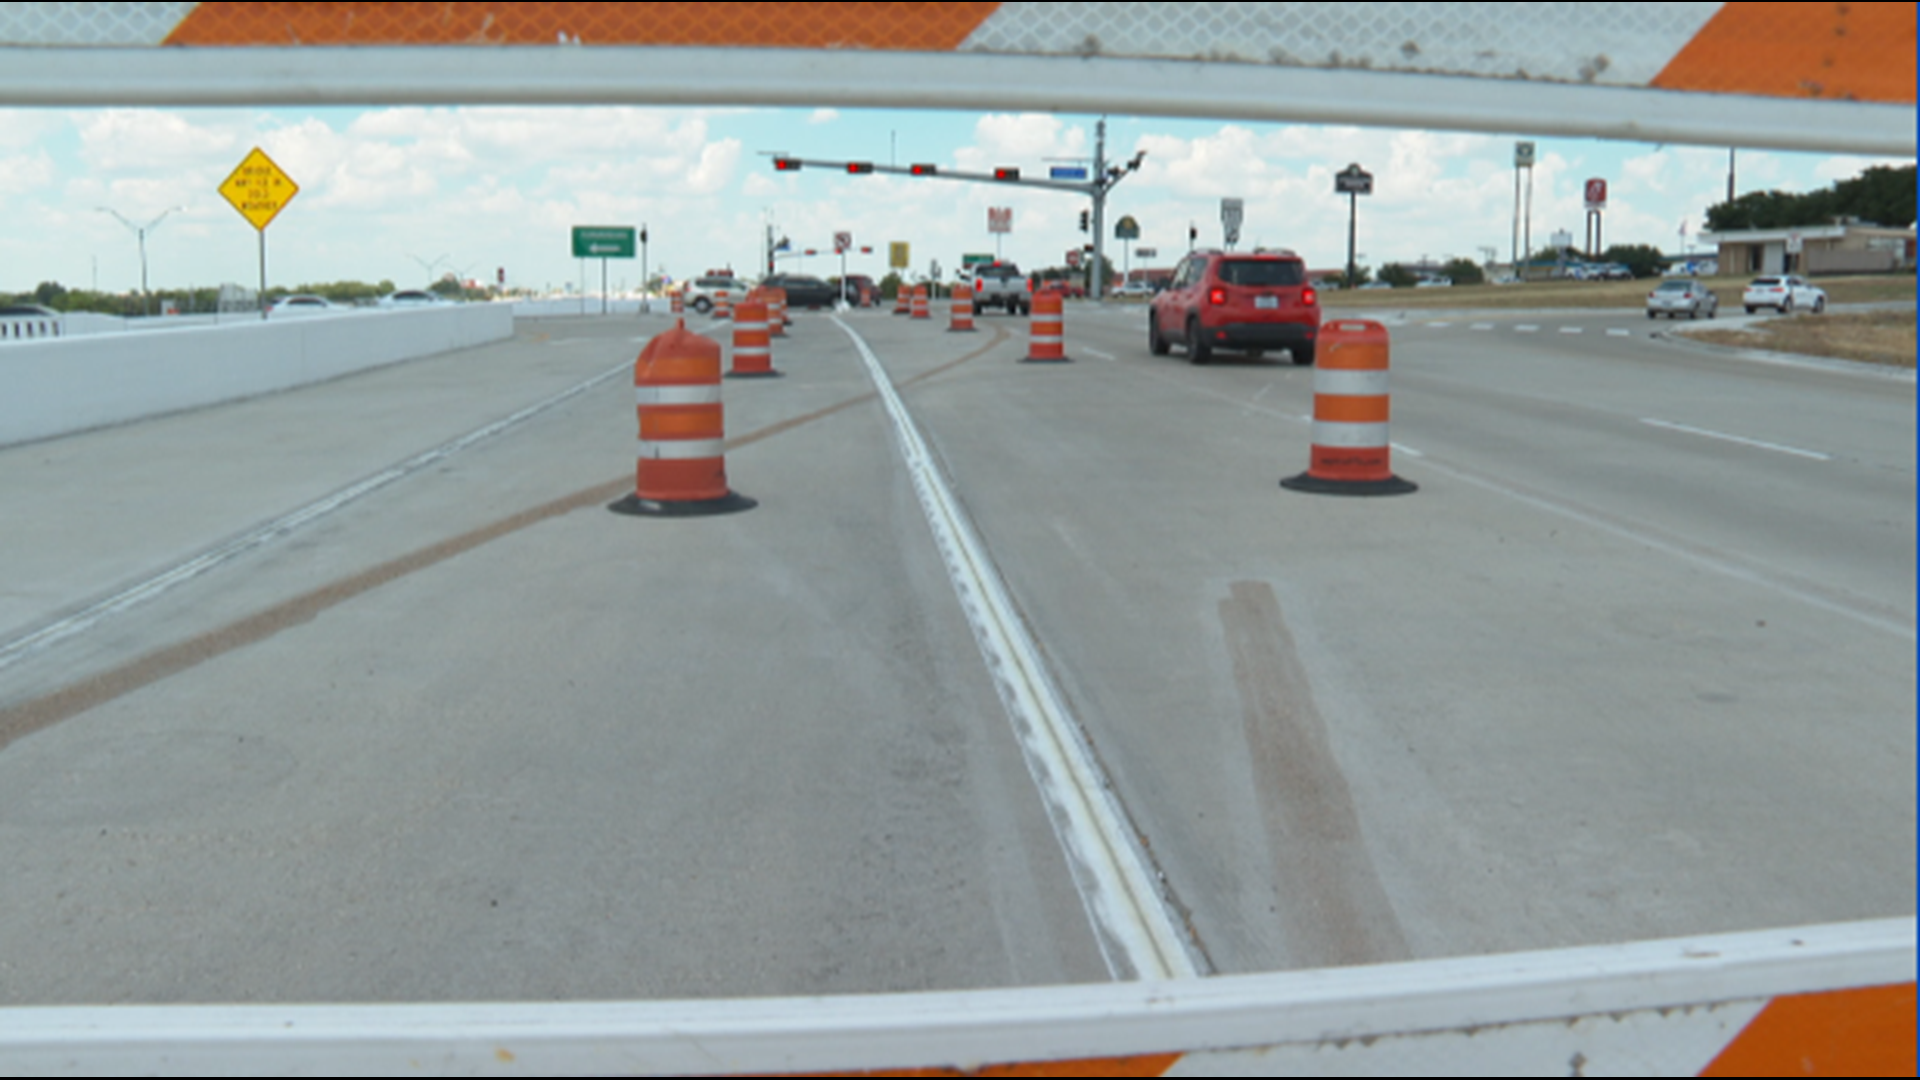 As Temple drivers navigate the new roadway over I-35, there are still closed lanes, unfinished striping and light synchronization issues leading to congested traffic.